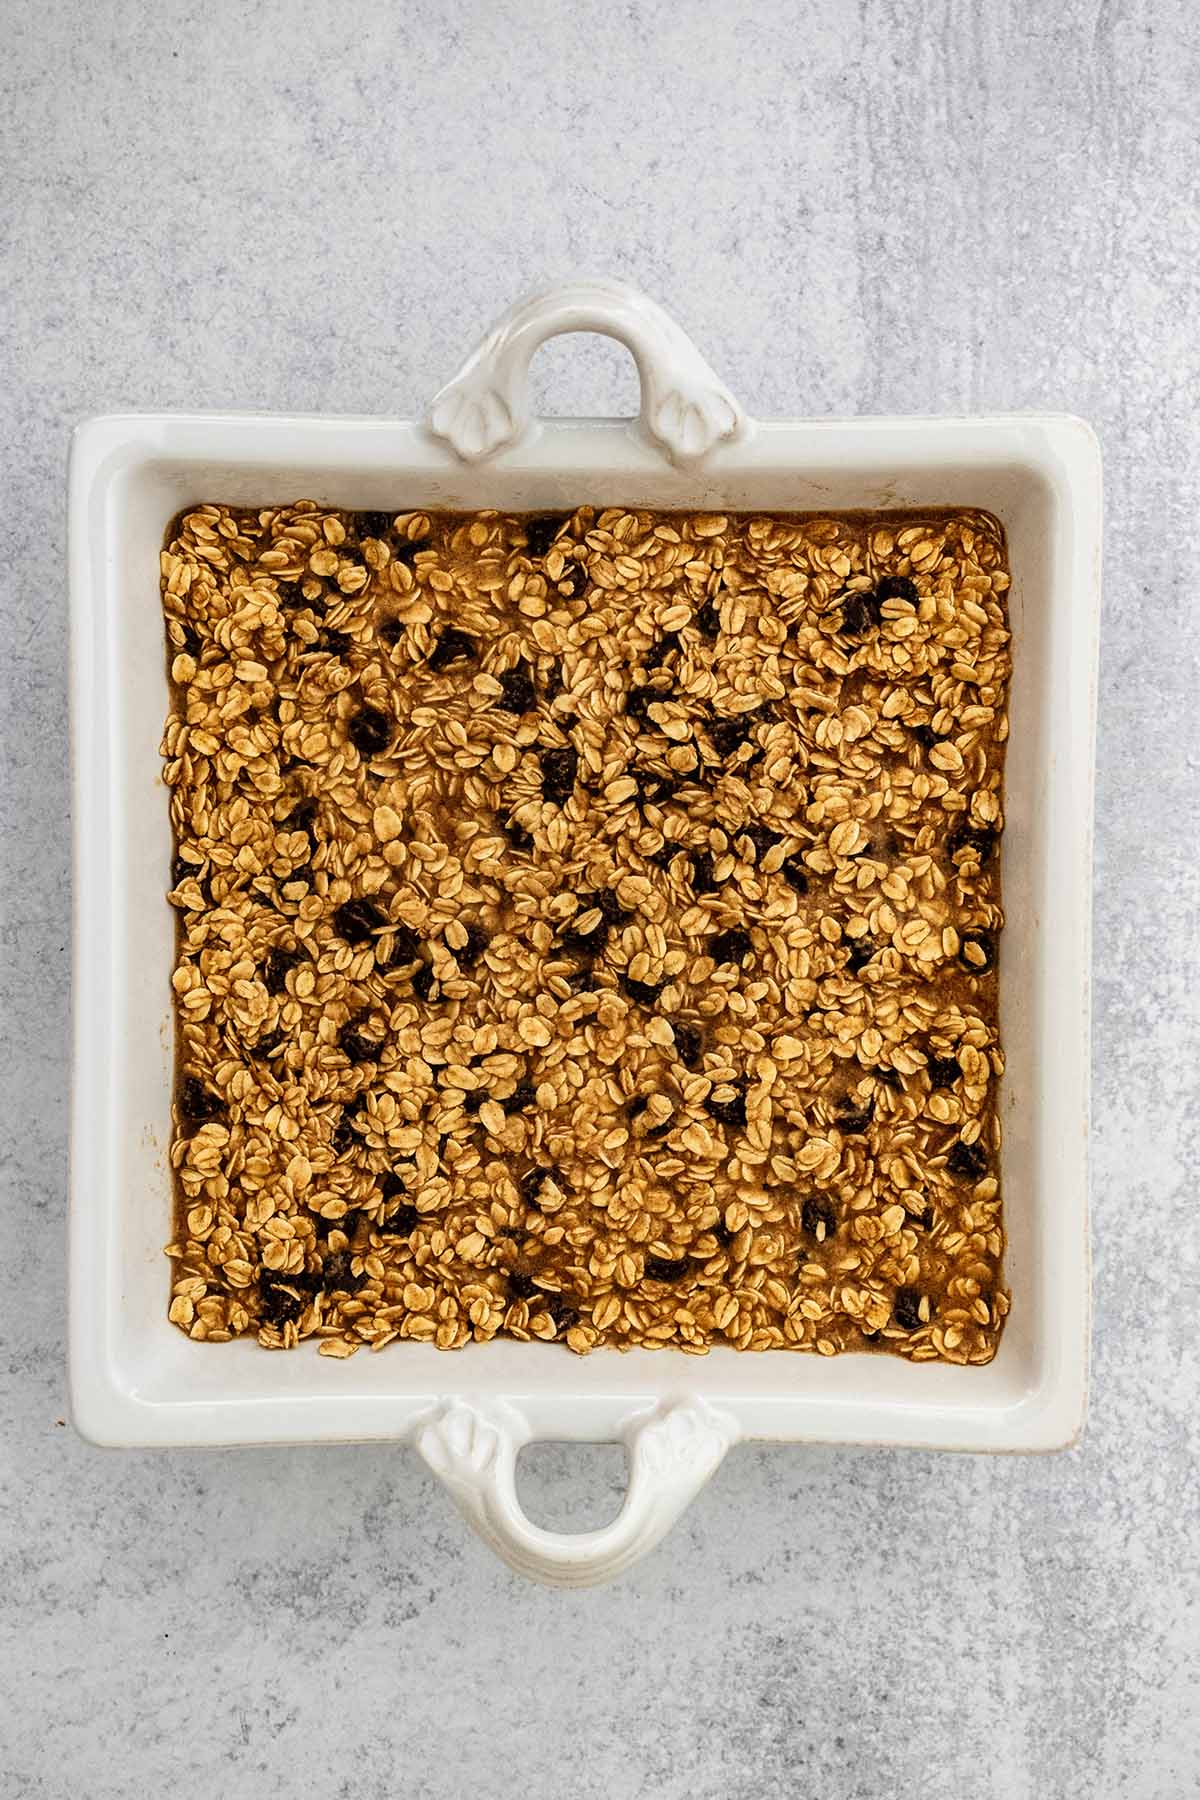 Oat mixture in a square white baking dish.